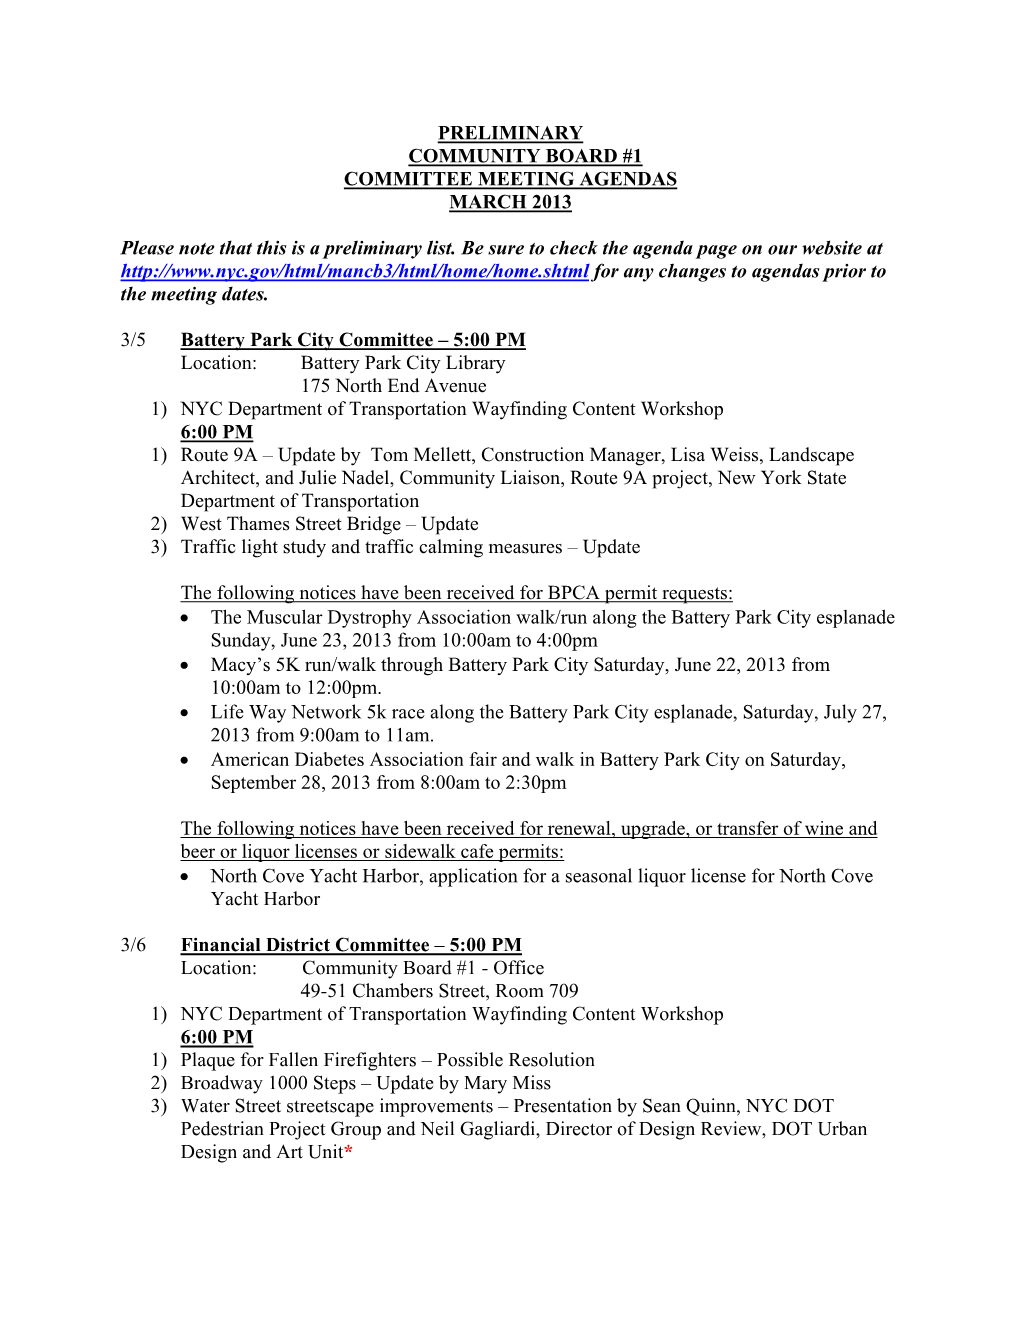 Preliminary Community Board #1 Committee Meeting Agendas March 2013